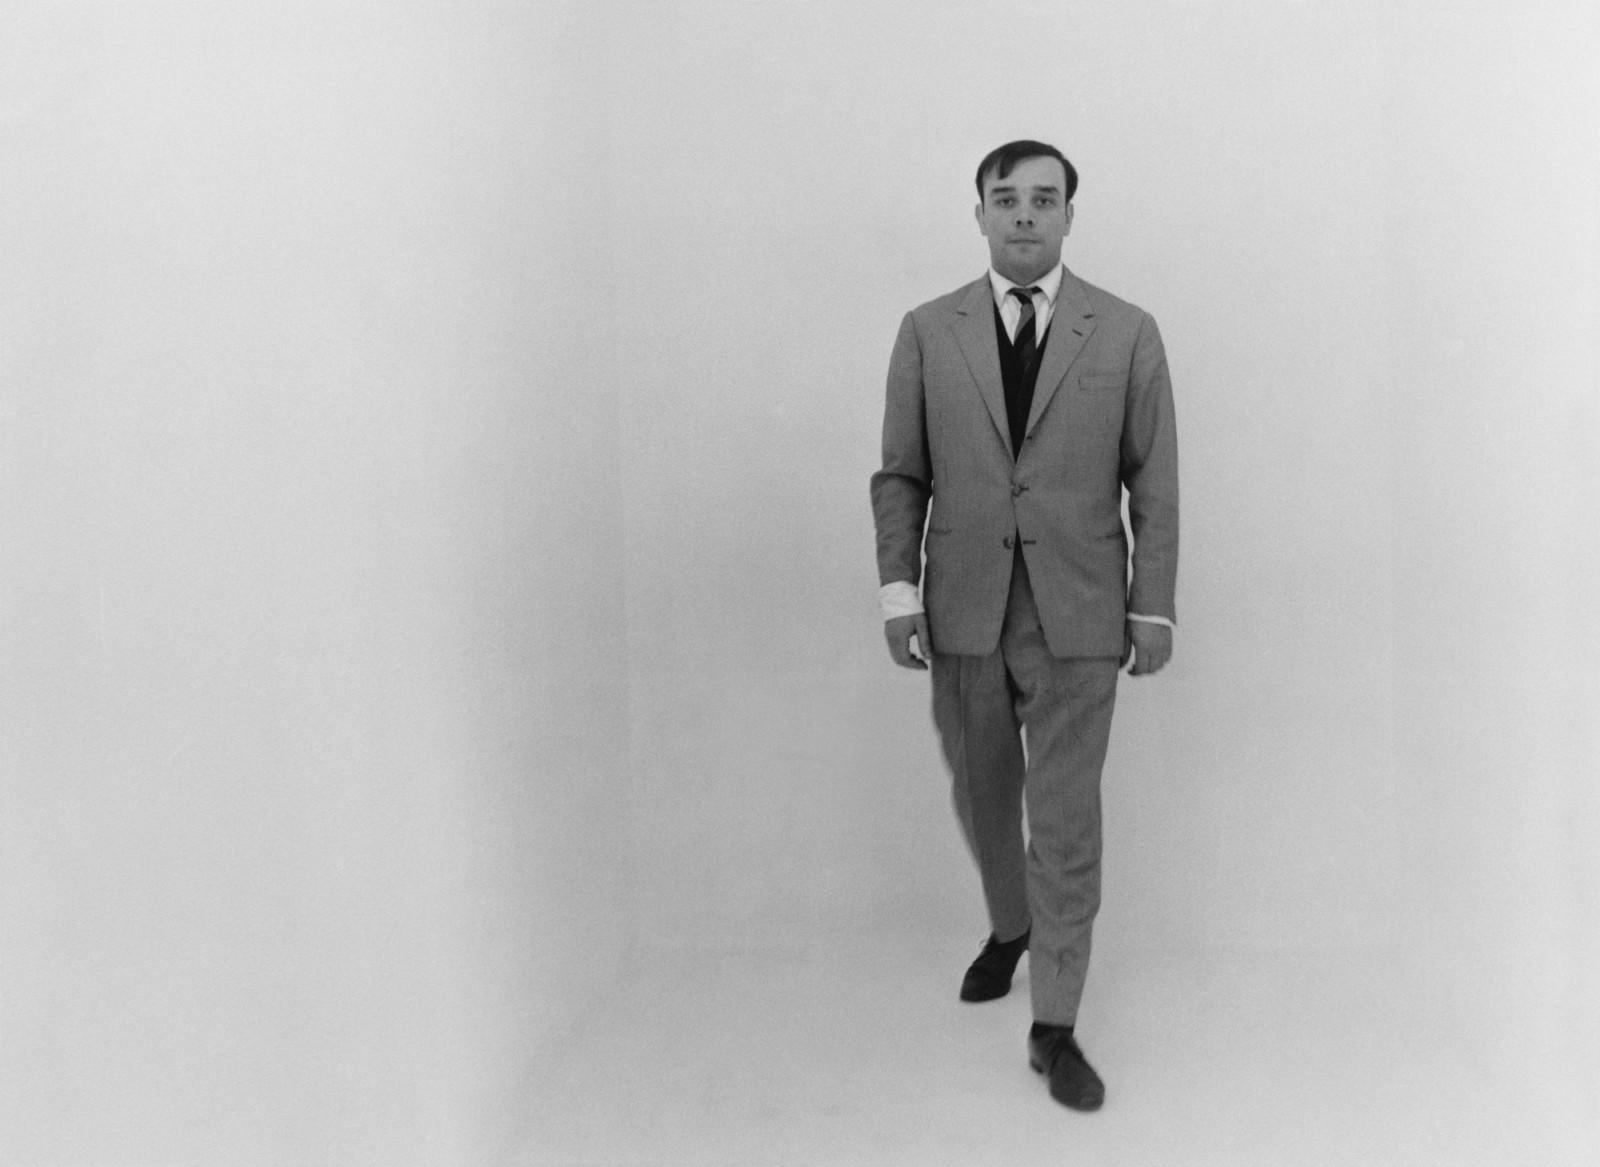 Yves Klein in the room dedicated to the "Immaterial Pictorial Sensibility"